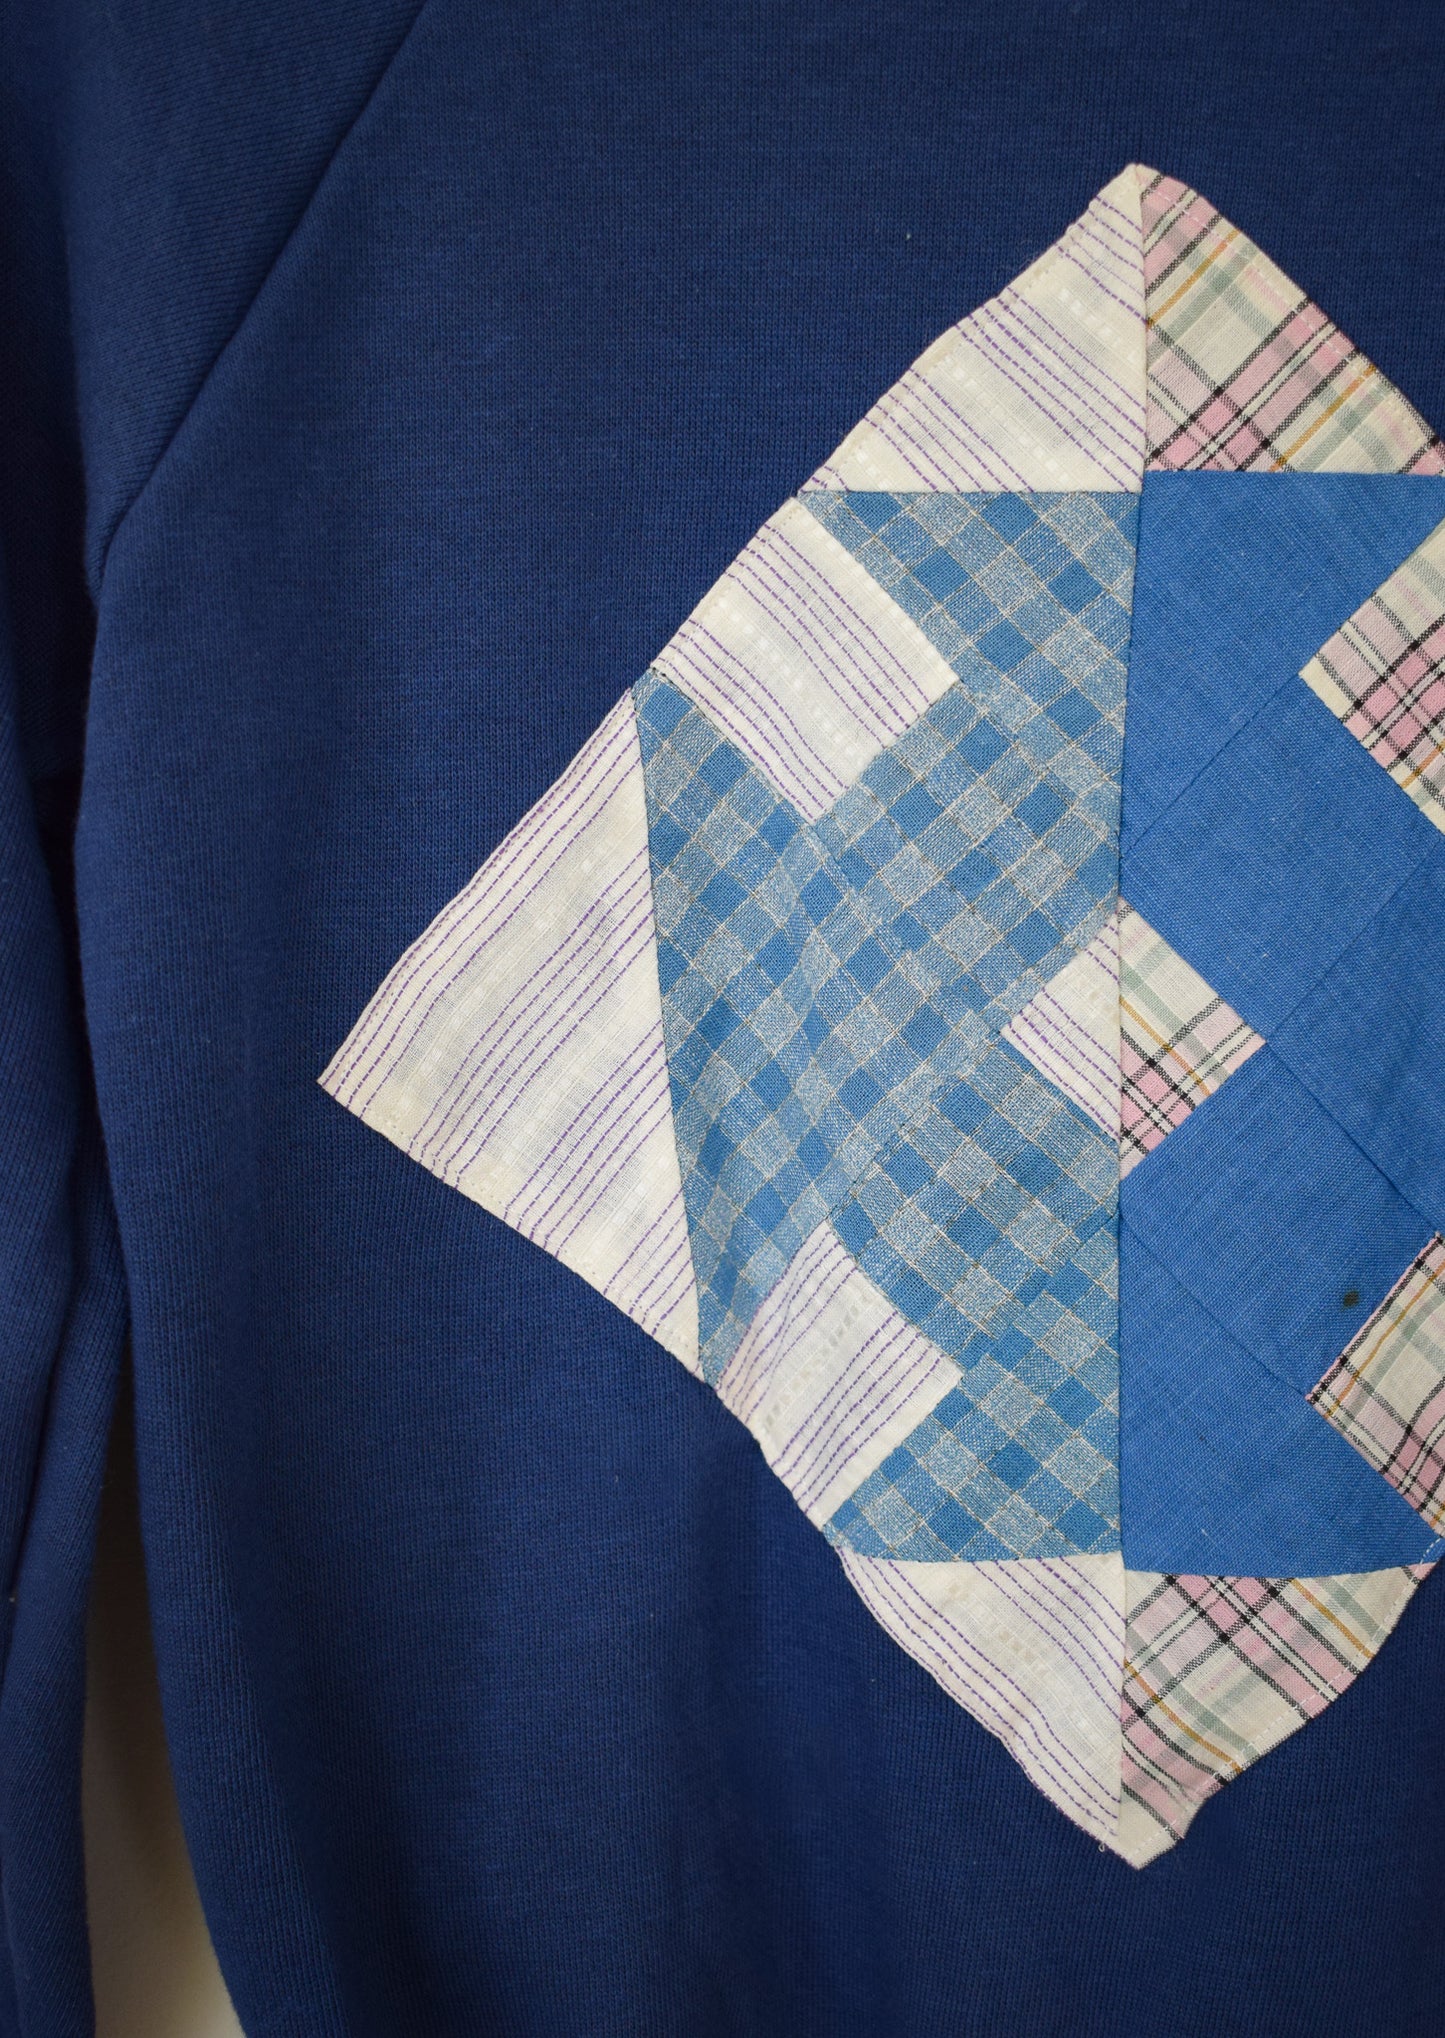 Vintage Raglan with Quilt Square Patch | Blue | XS/S